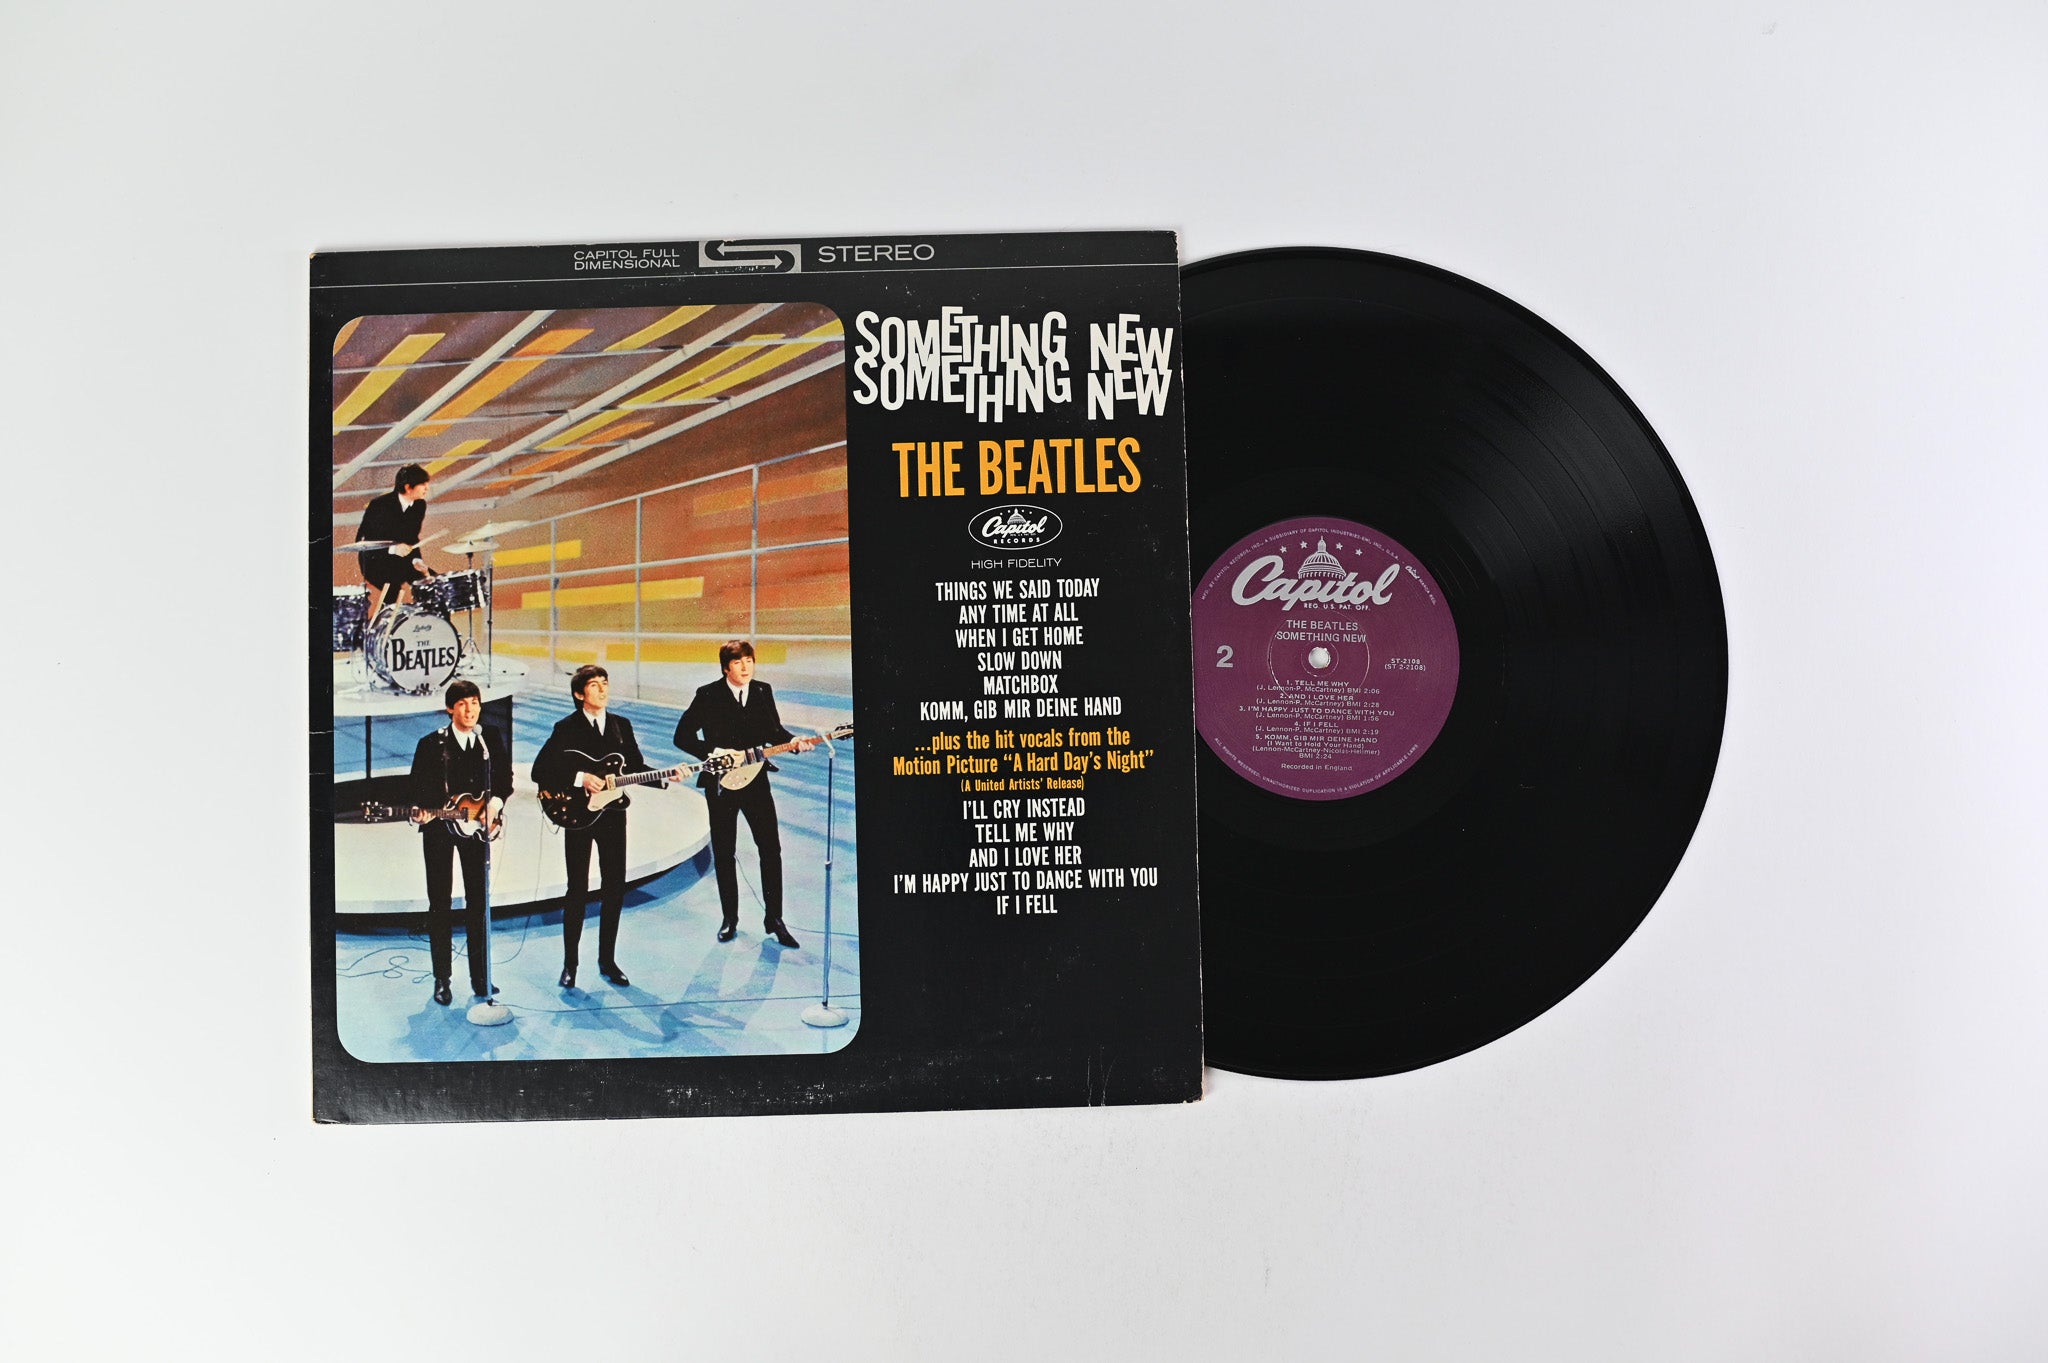 The Beatles - Something New on Capitol Records Reissue